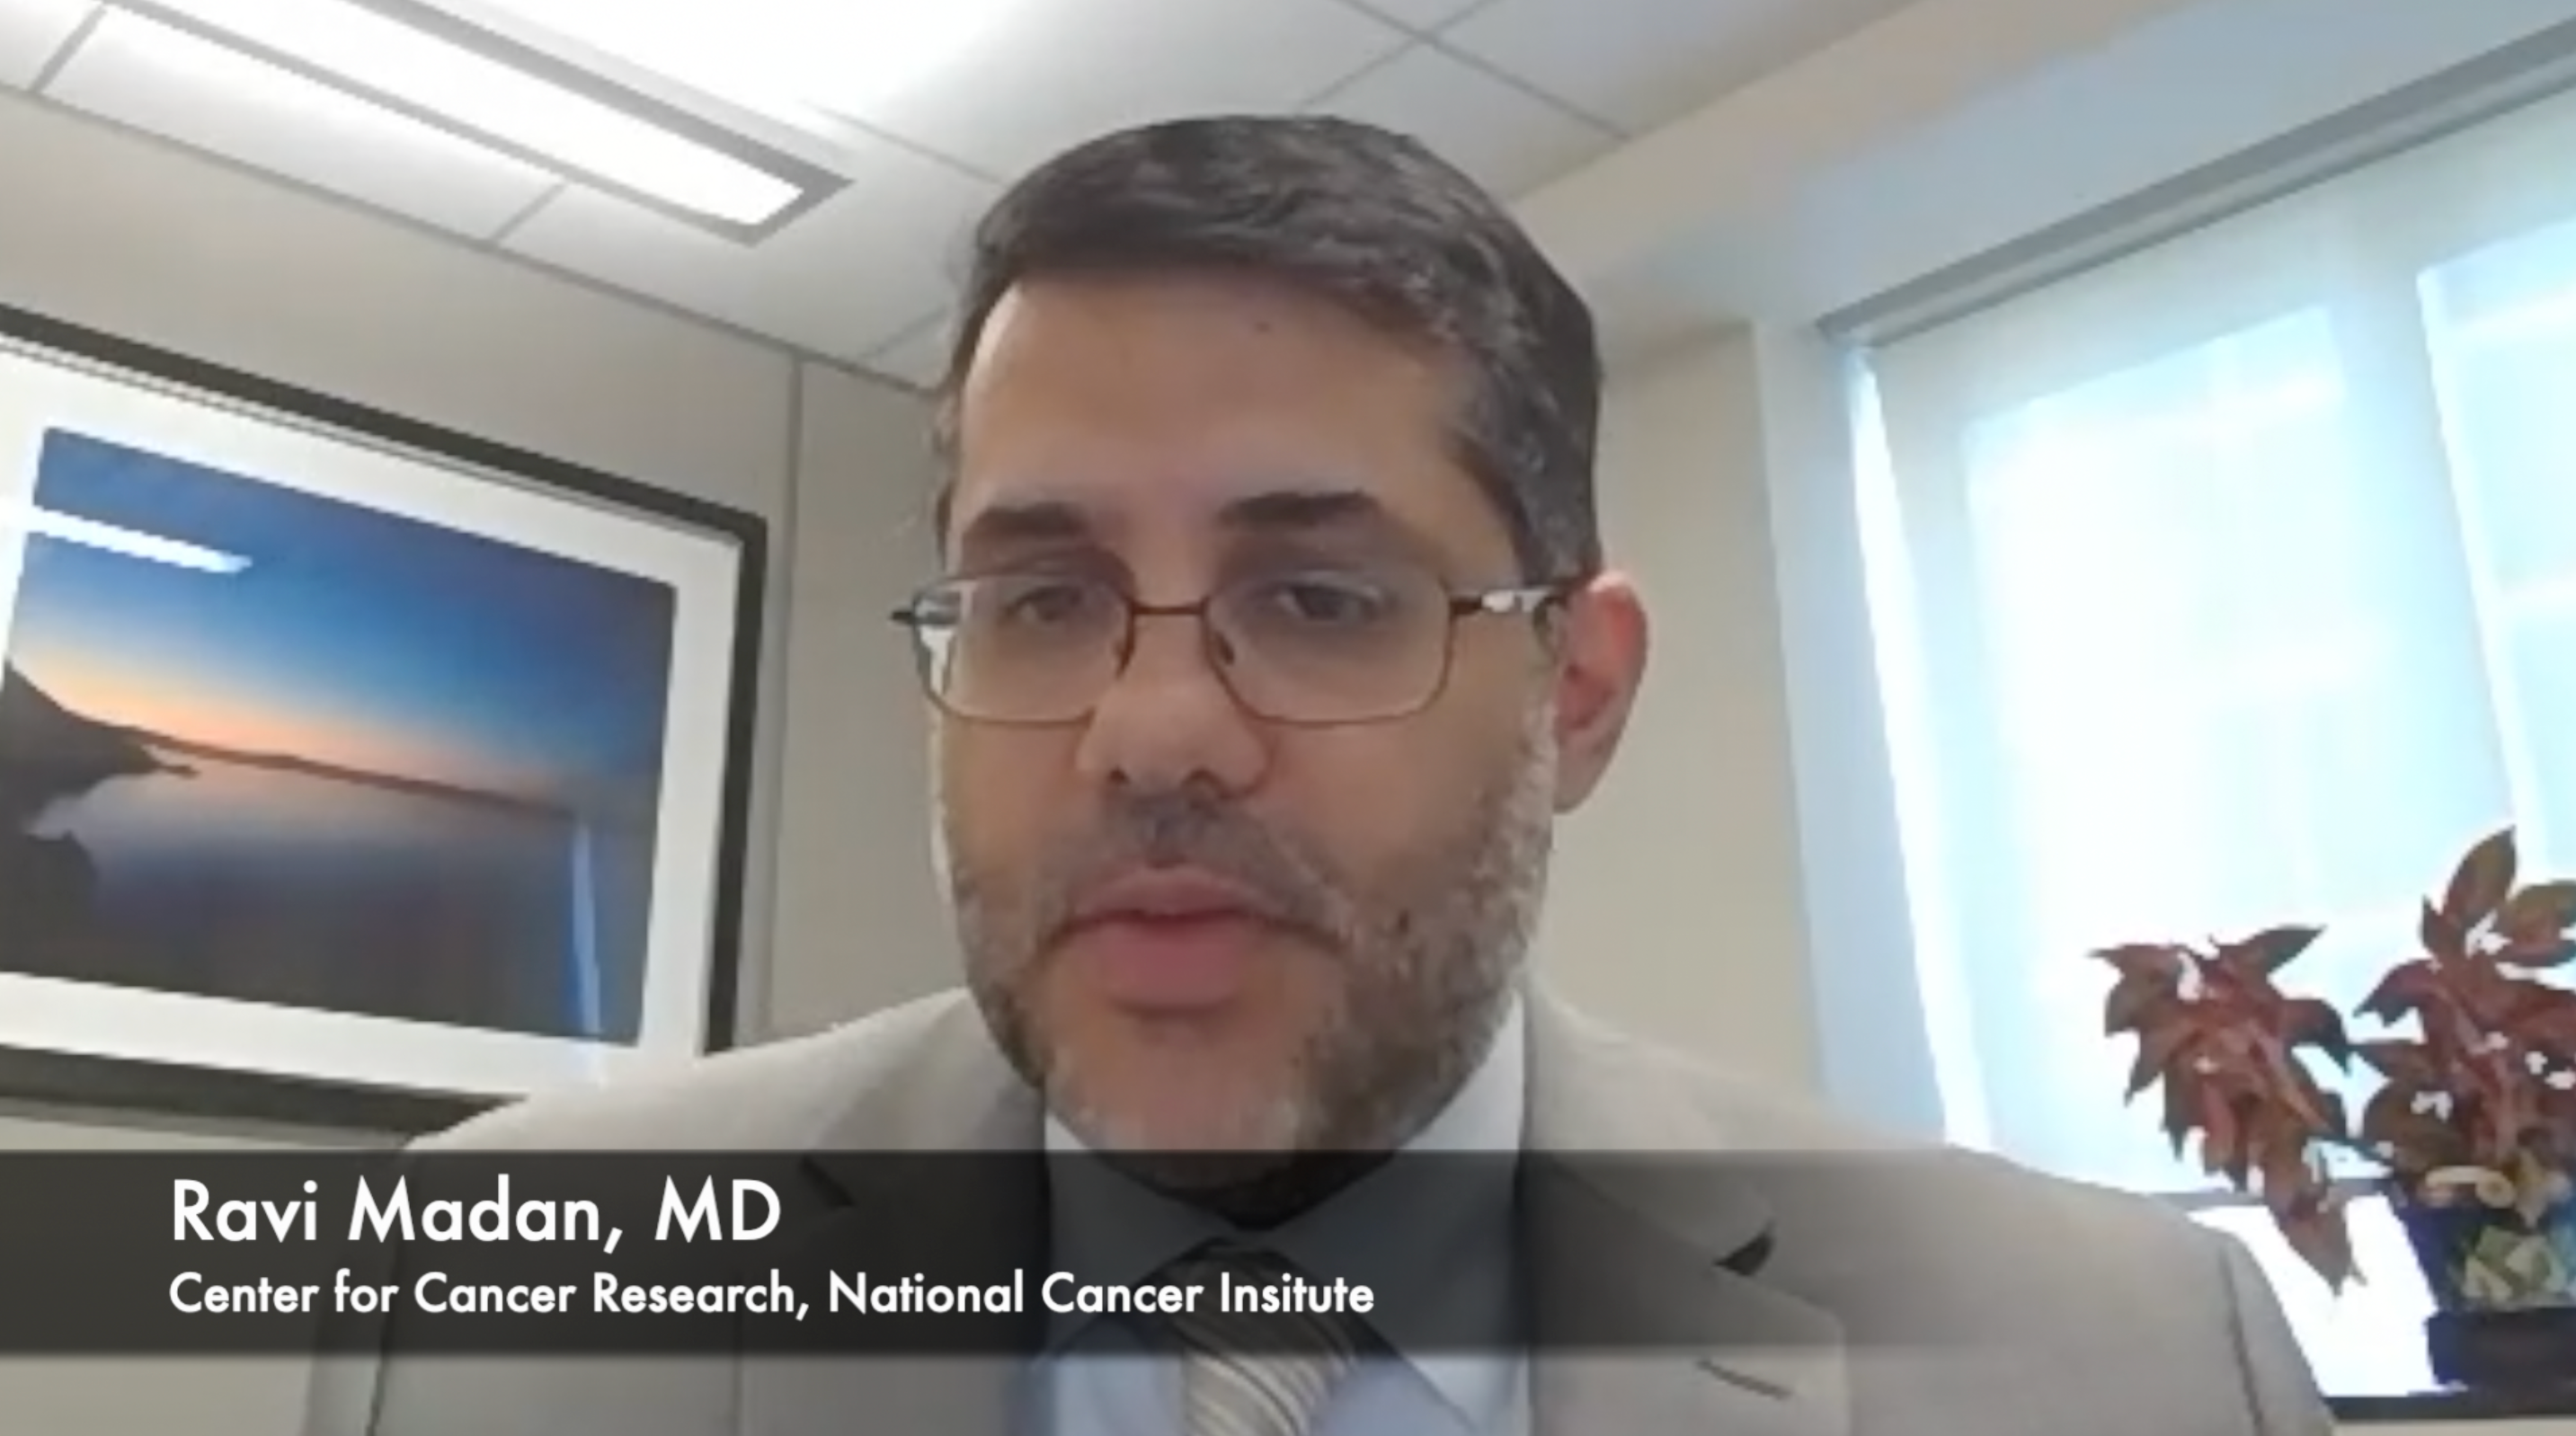  Ravi A. Madan, MD, discusses the potential impact of docetaxel, abiraterone acetate, androgen deprivation therapy, and radiotherapy on patients with metastatic castration-sensitive prostate cancer.